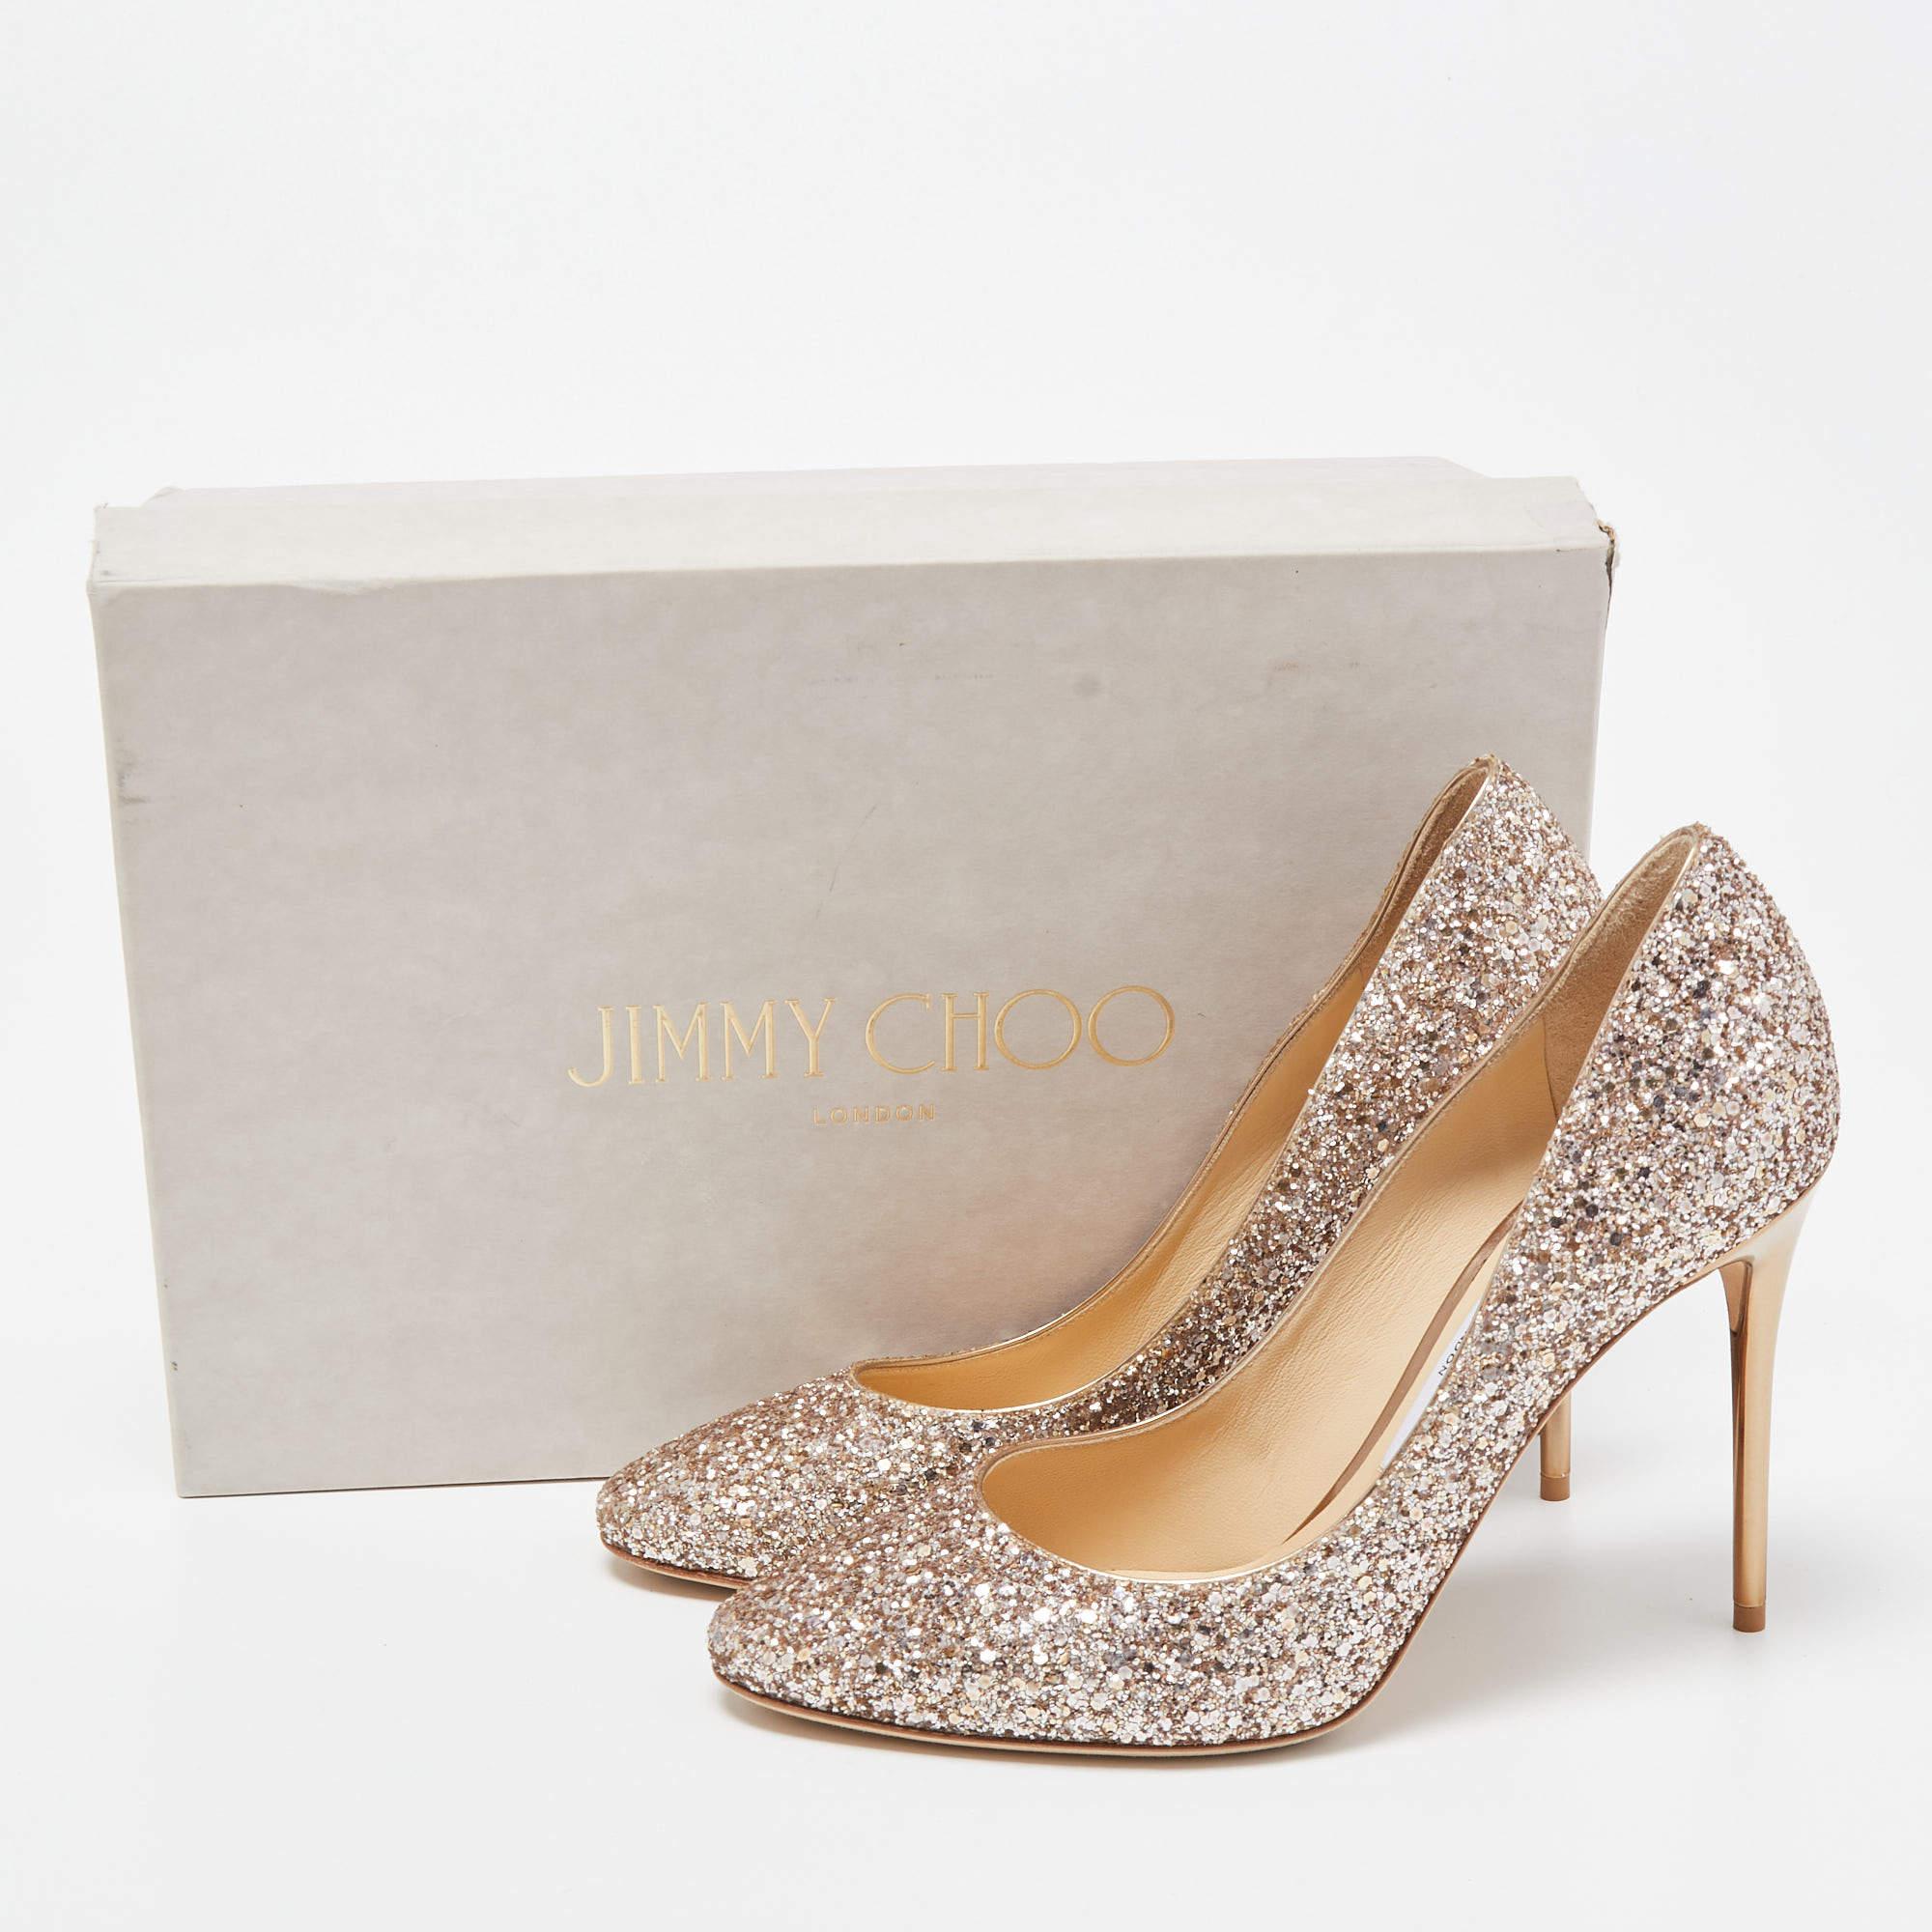 Jimmy Choo Multicolor Glitter Romy Round Toe Pumps Size 37.5 For Sale 2